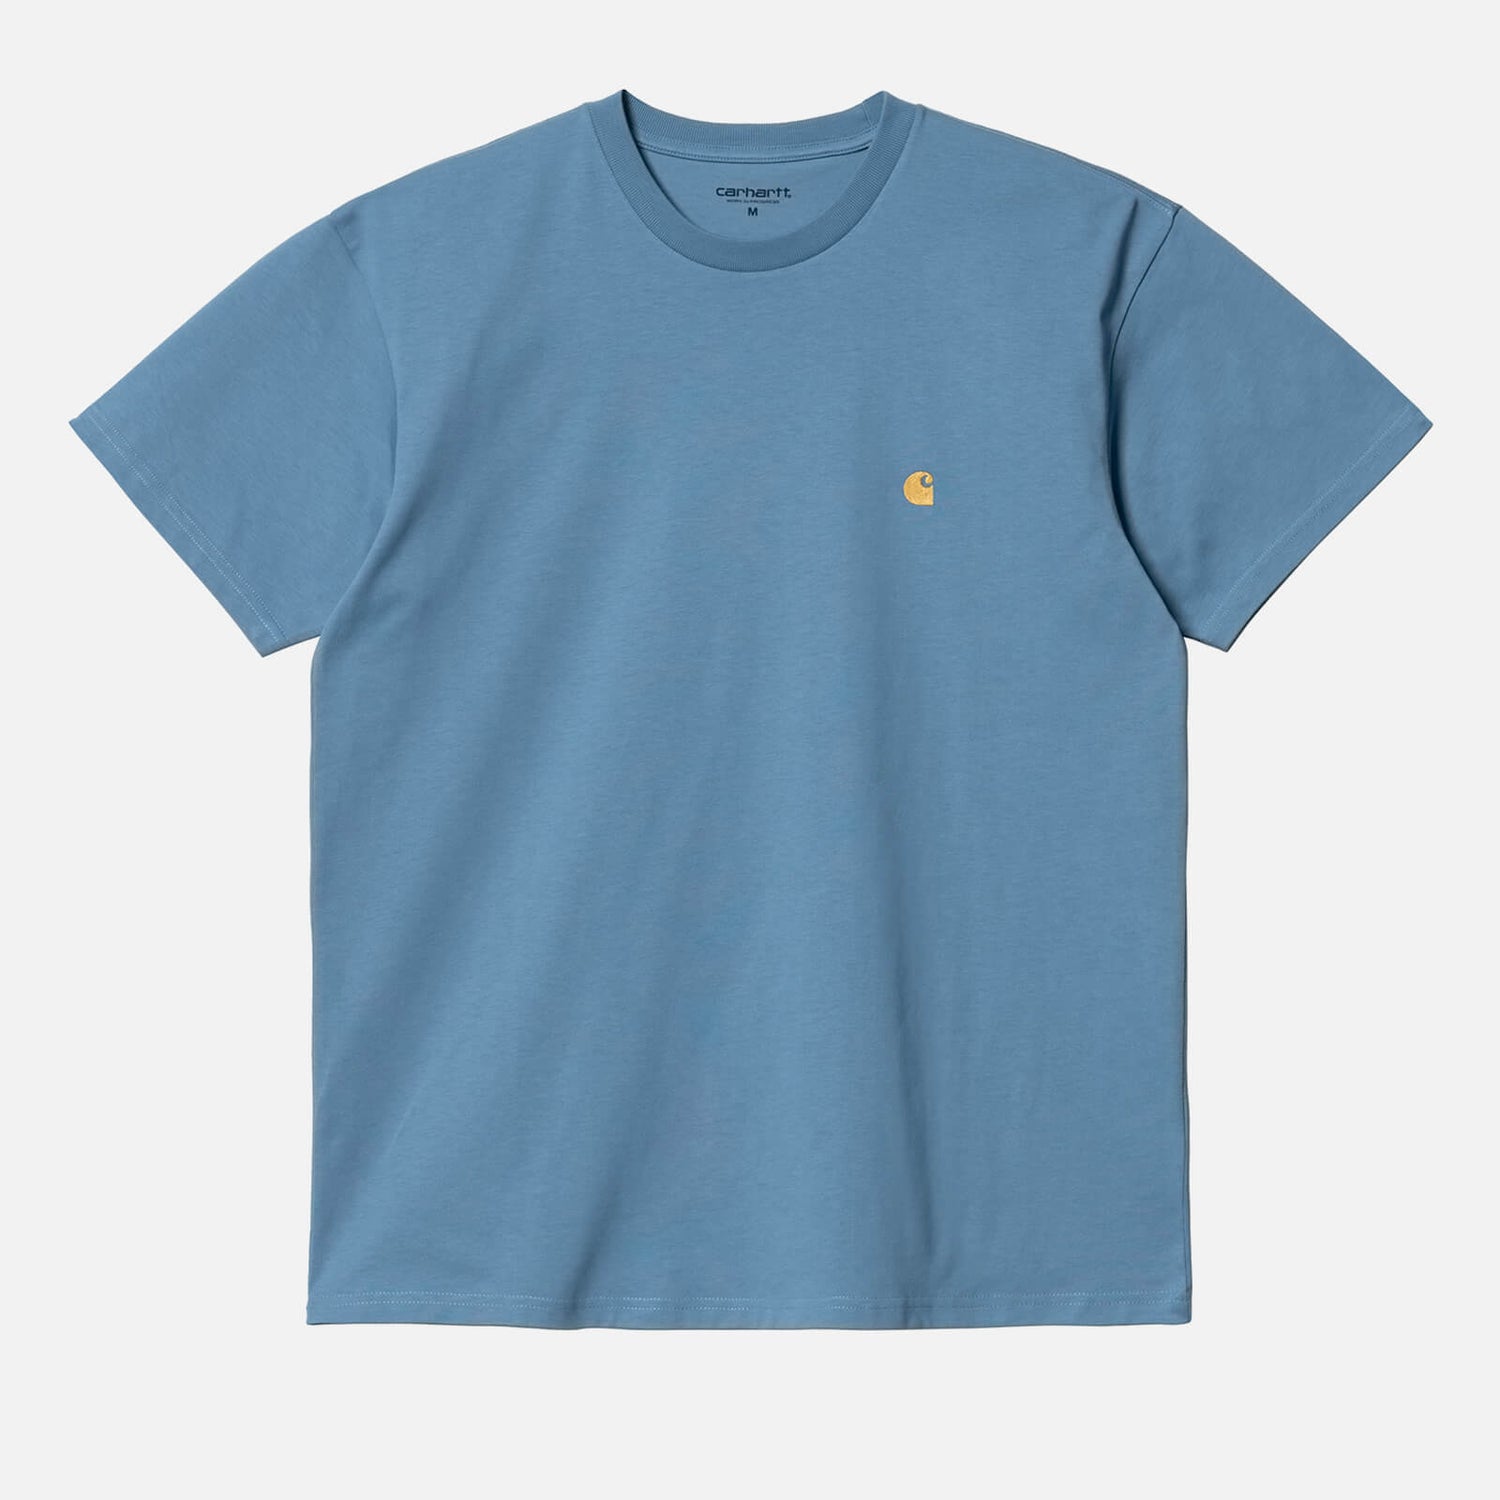 Carhartt WIP Men's Chase T-Shirt - Icy Water/Gold - XL